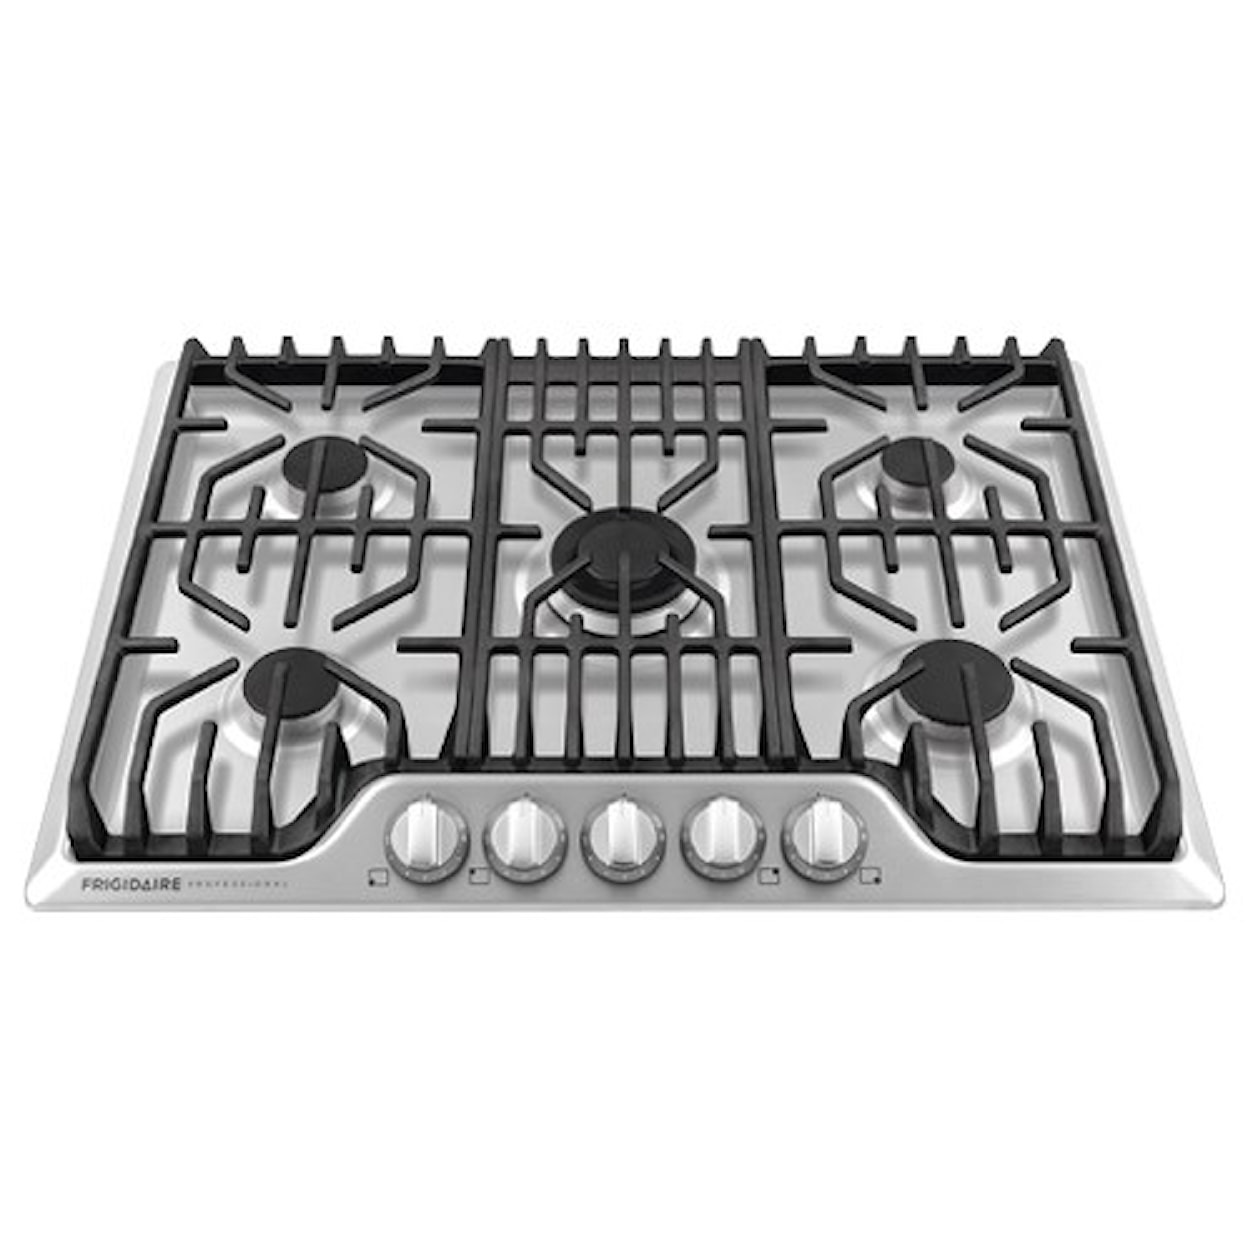 Frigidaire Professional Collection - Cooktops 30" Frigidaire Professional Gas Cooktop